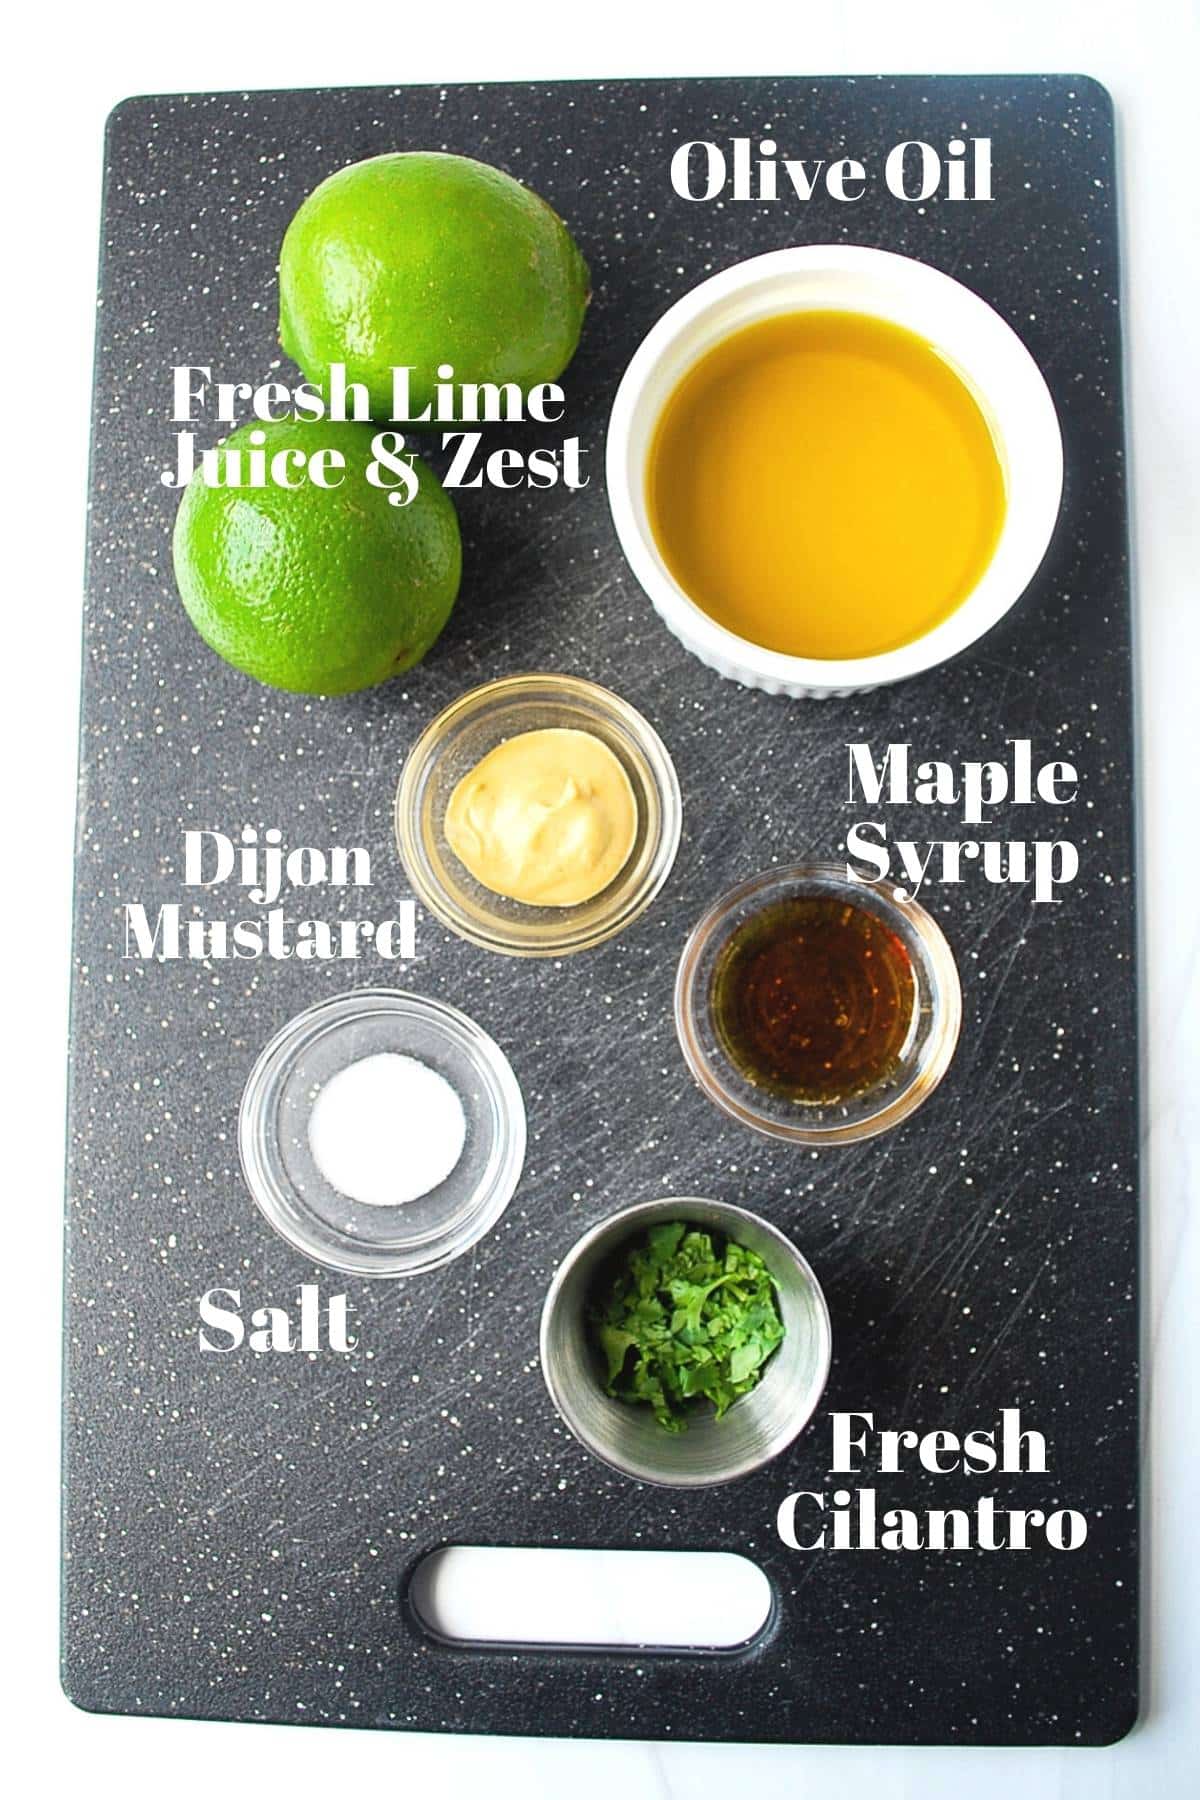 Cilantro lime dressing ingredients on a black cutting board